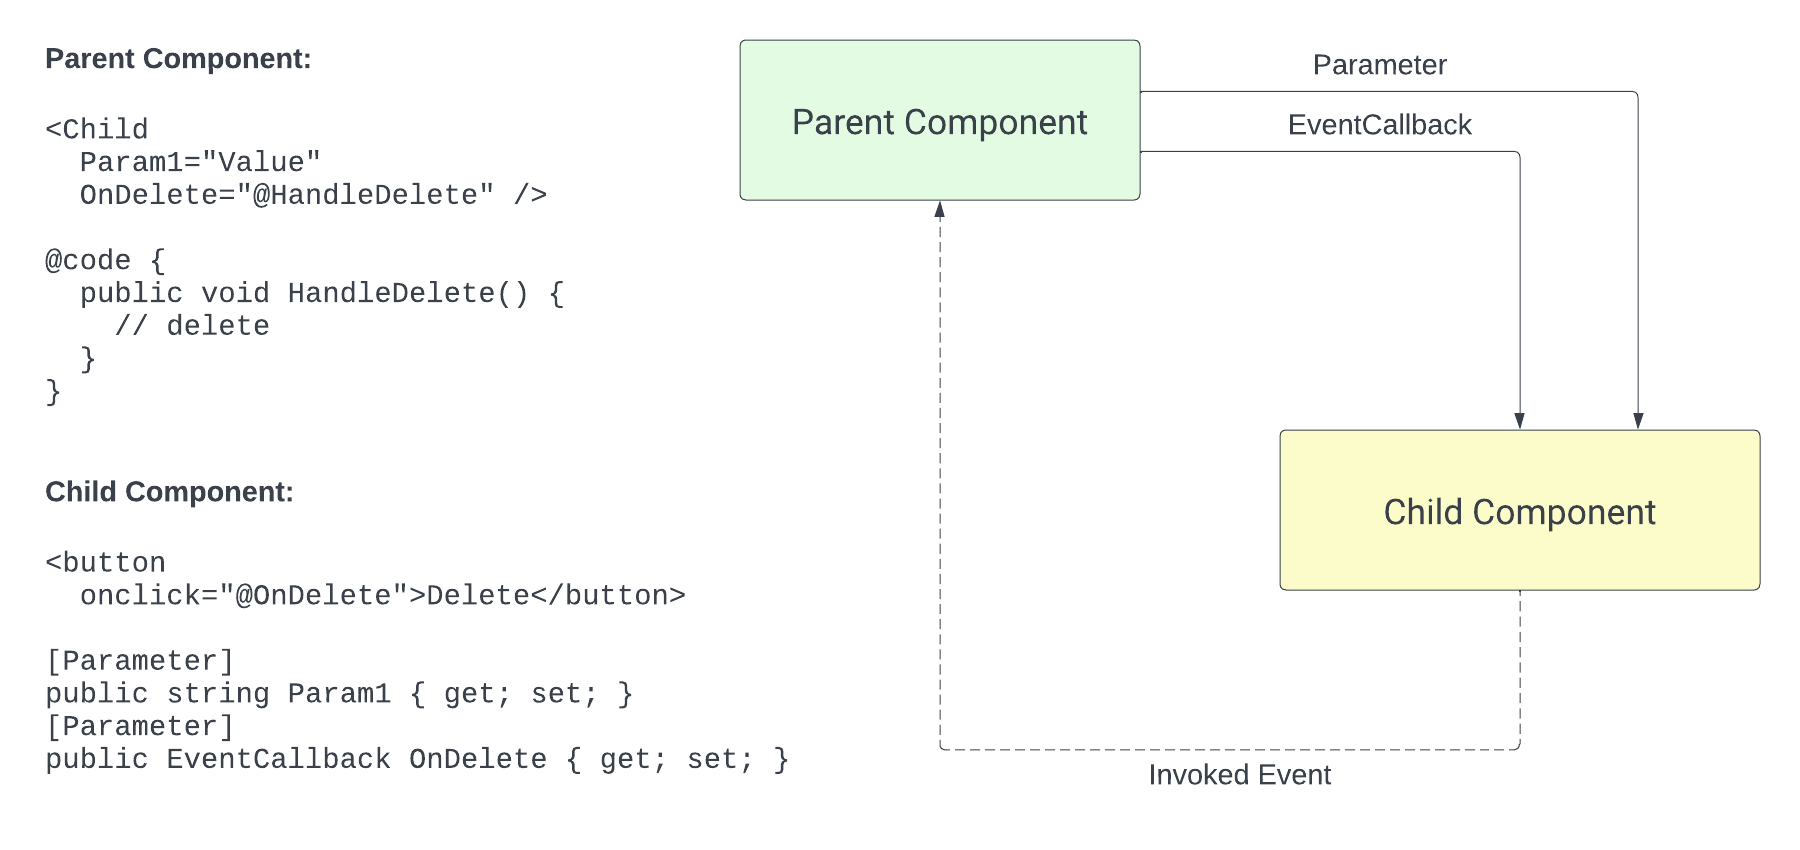 A parent/child example using parameters and event callbacks for communication. The event callback and the parameter are provided from the parent to the child component. The child component invokes the event to send information from the child component to its parent.